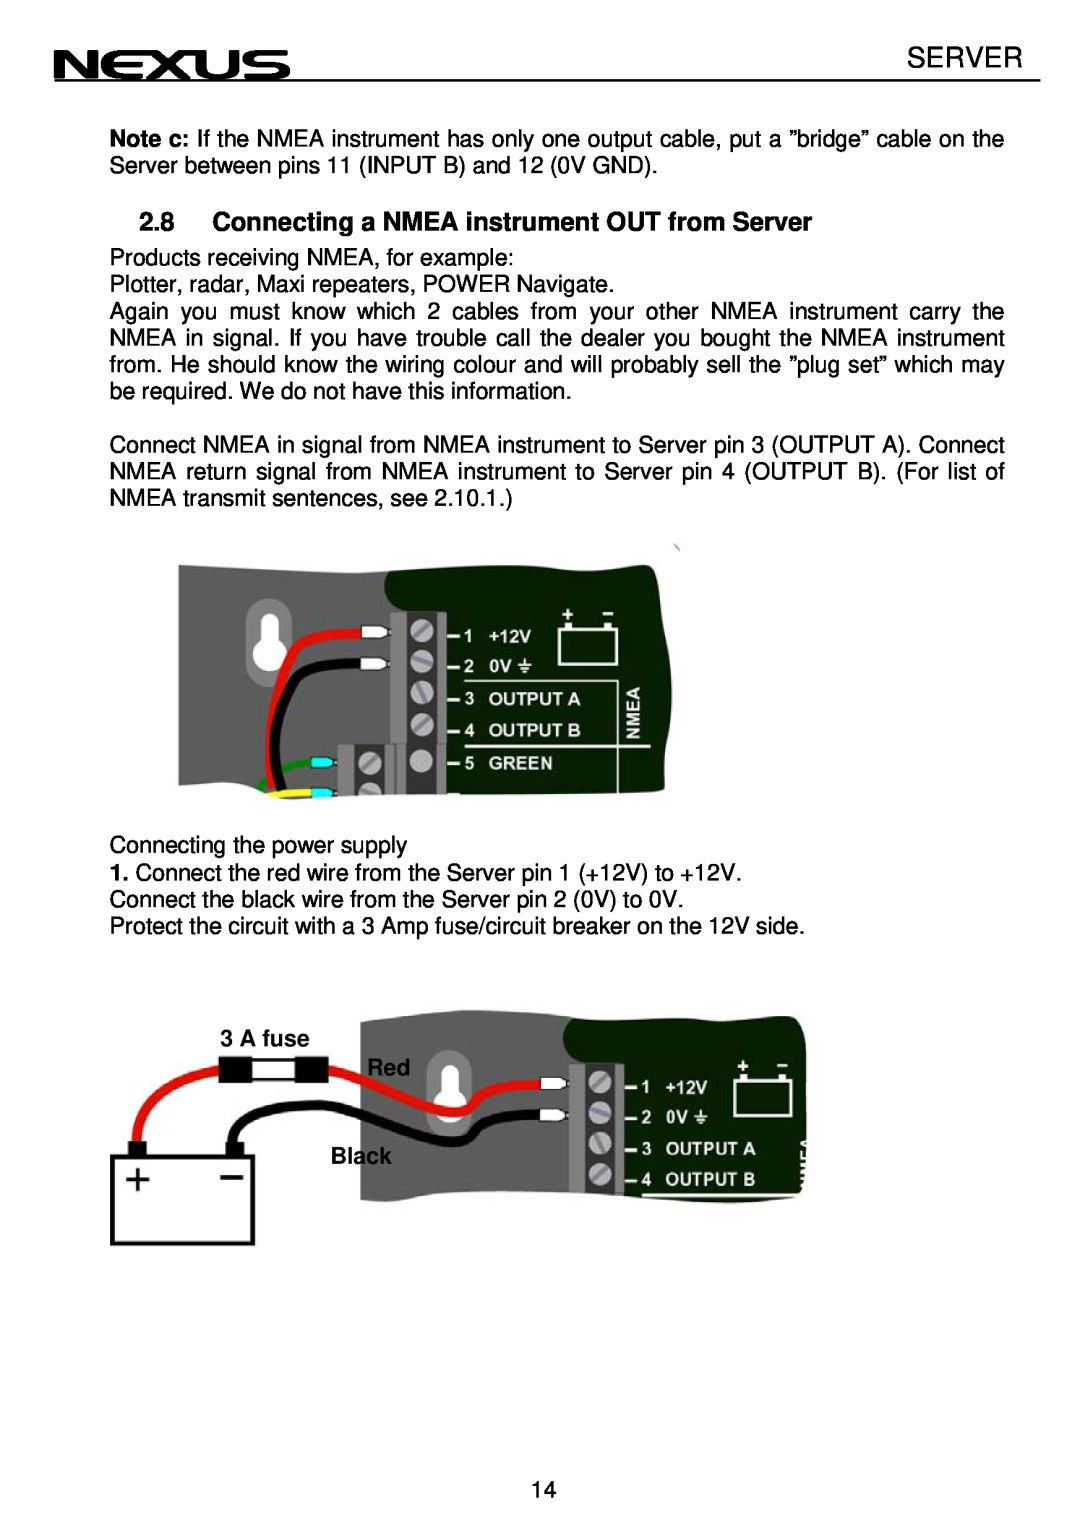 Nexus 21 NX2 operation manual Connecting a NMEA instrument OUT from Server, A fuse Red Black 